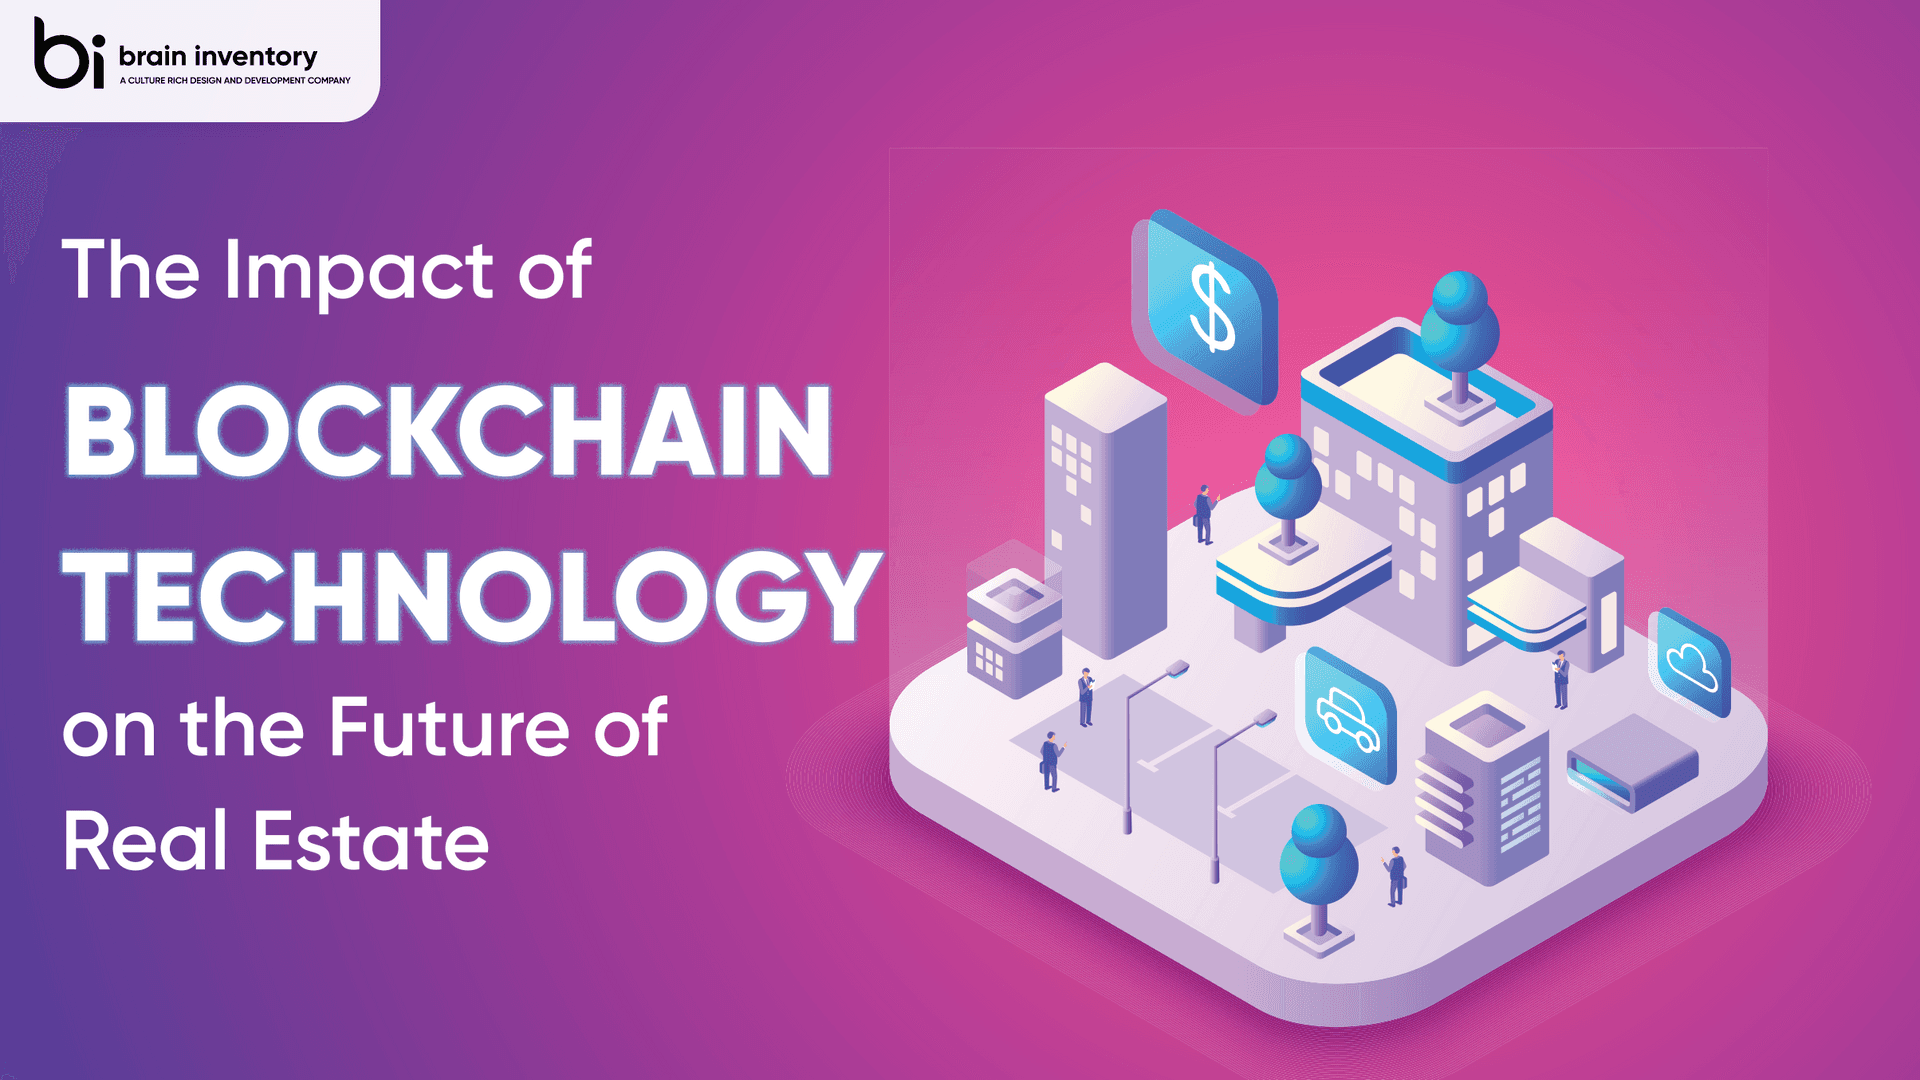 The Impact of Blockchain Technology on the Future of Real Estate